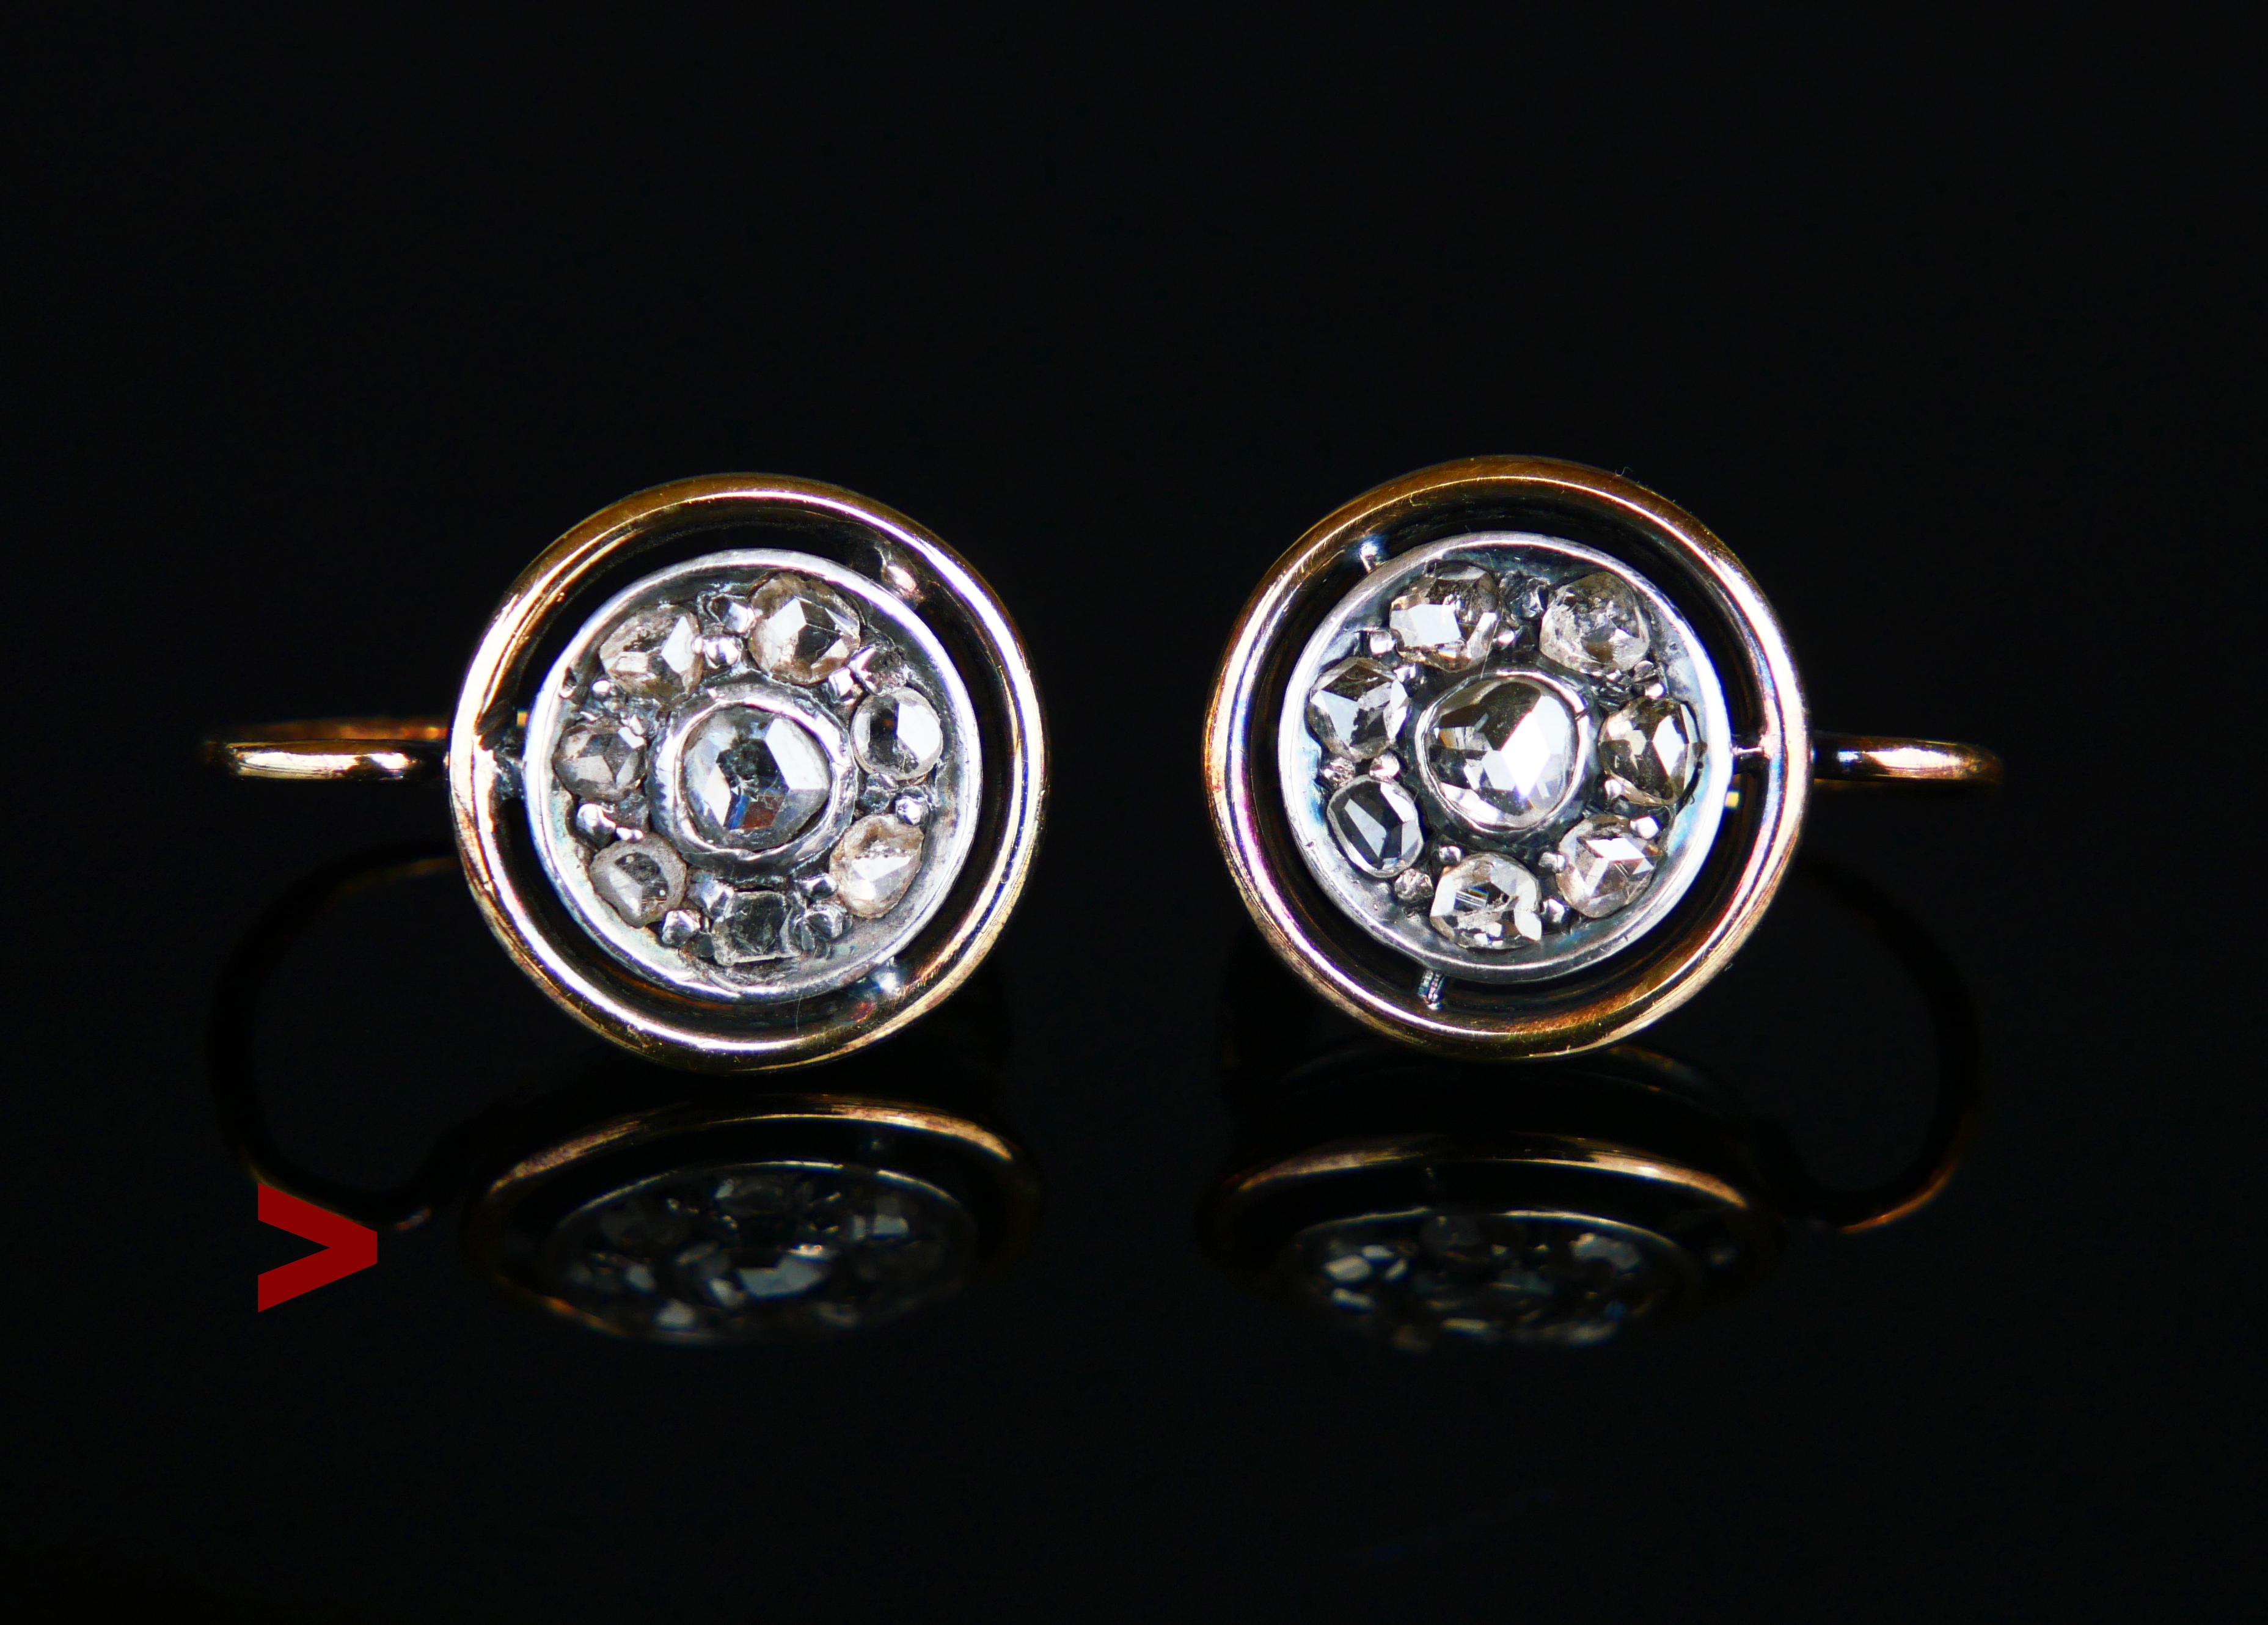 A pair of old German Diamond Earrings with folding hooks from ca 1920s - 1930s in an original Black, Red, and White period box.

No hallmarks, apparently custom-ordered. Metal tested above 14K, about 16K Solid Gold. Each earring is 17 mm long